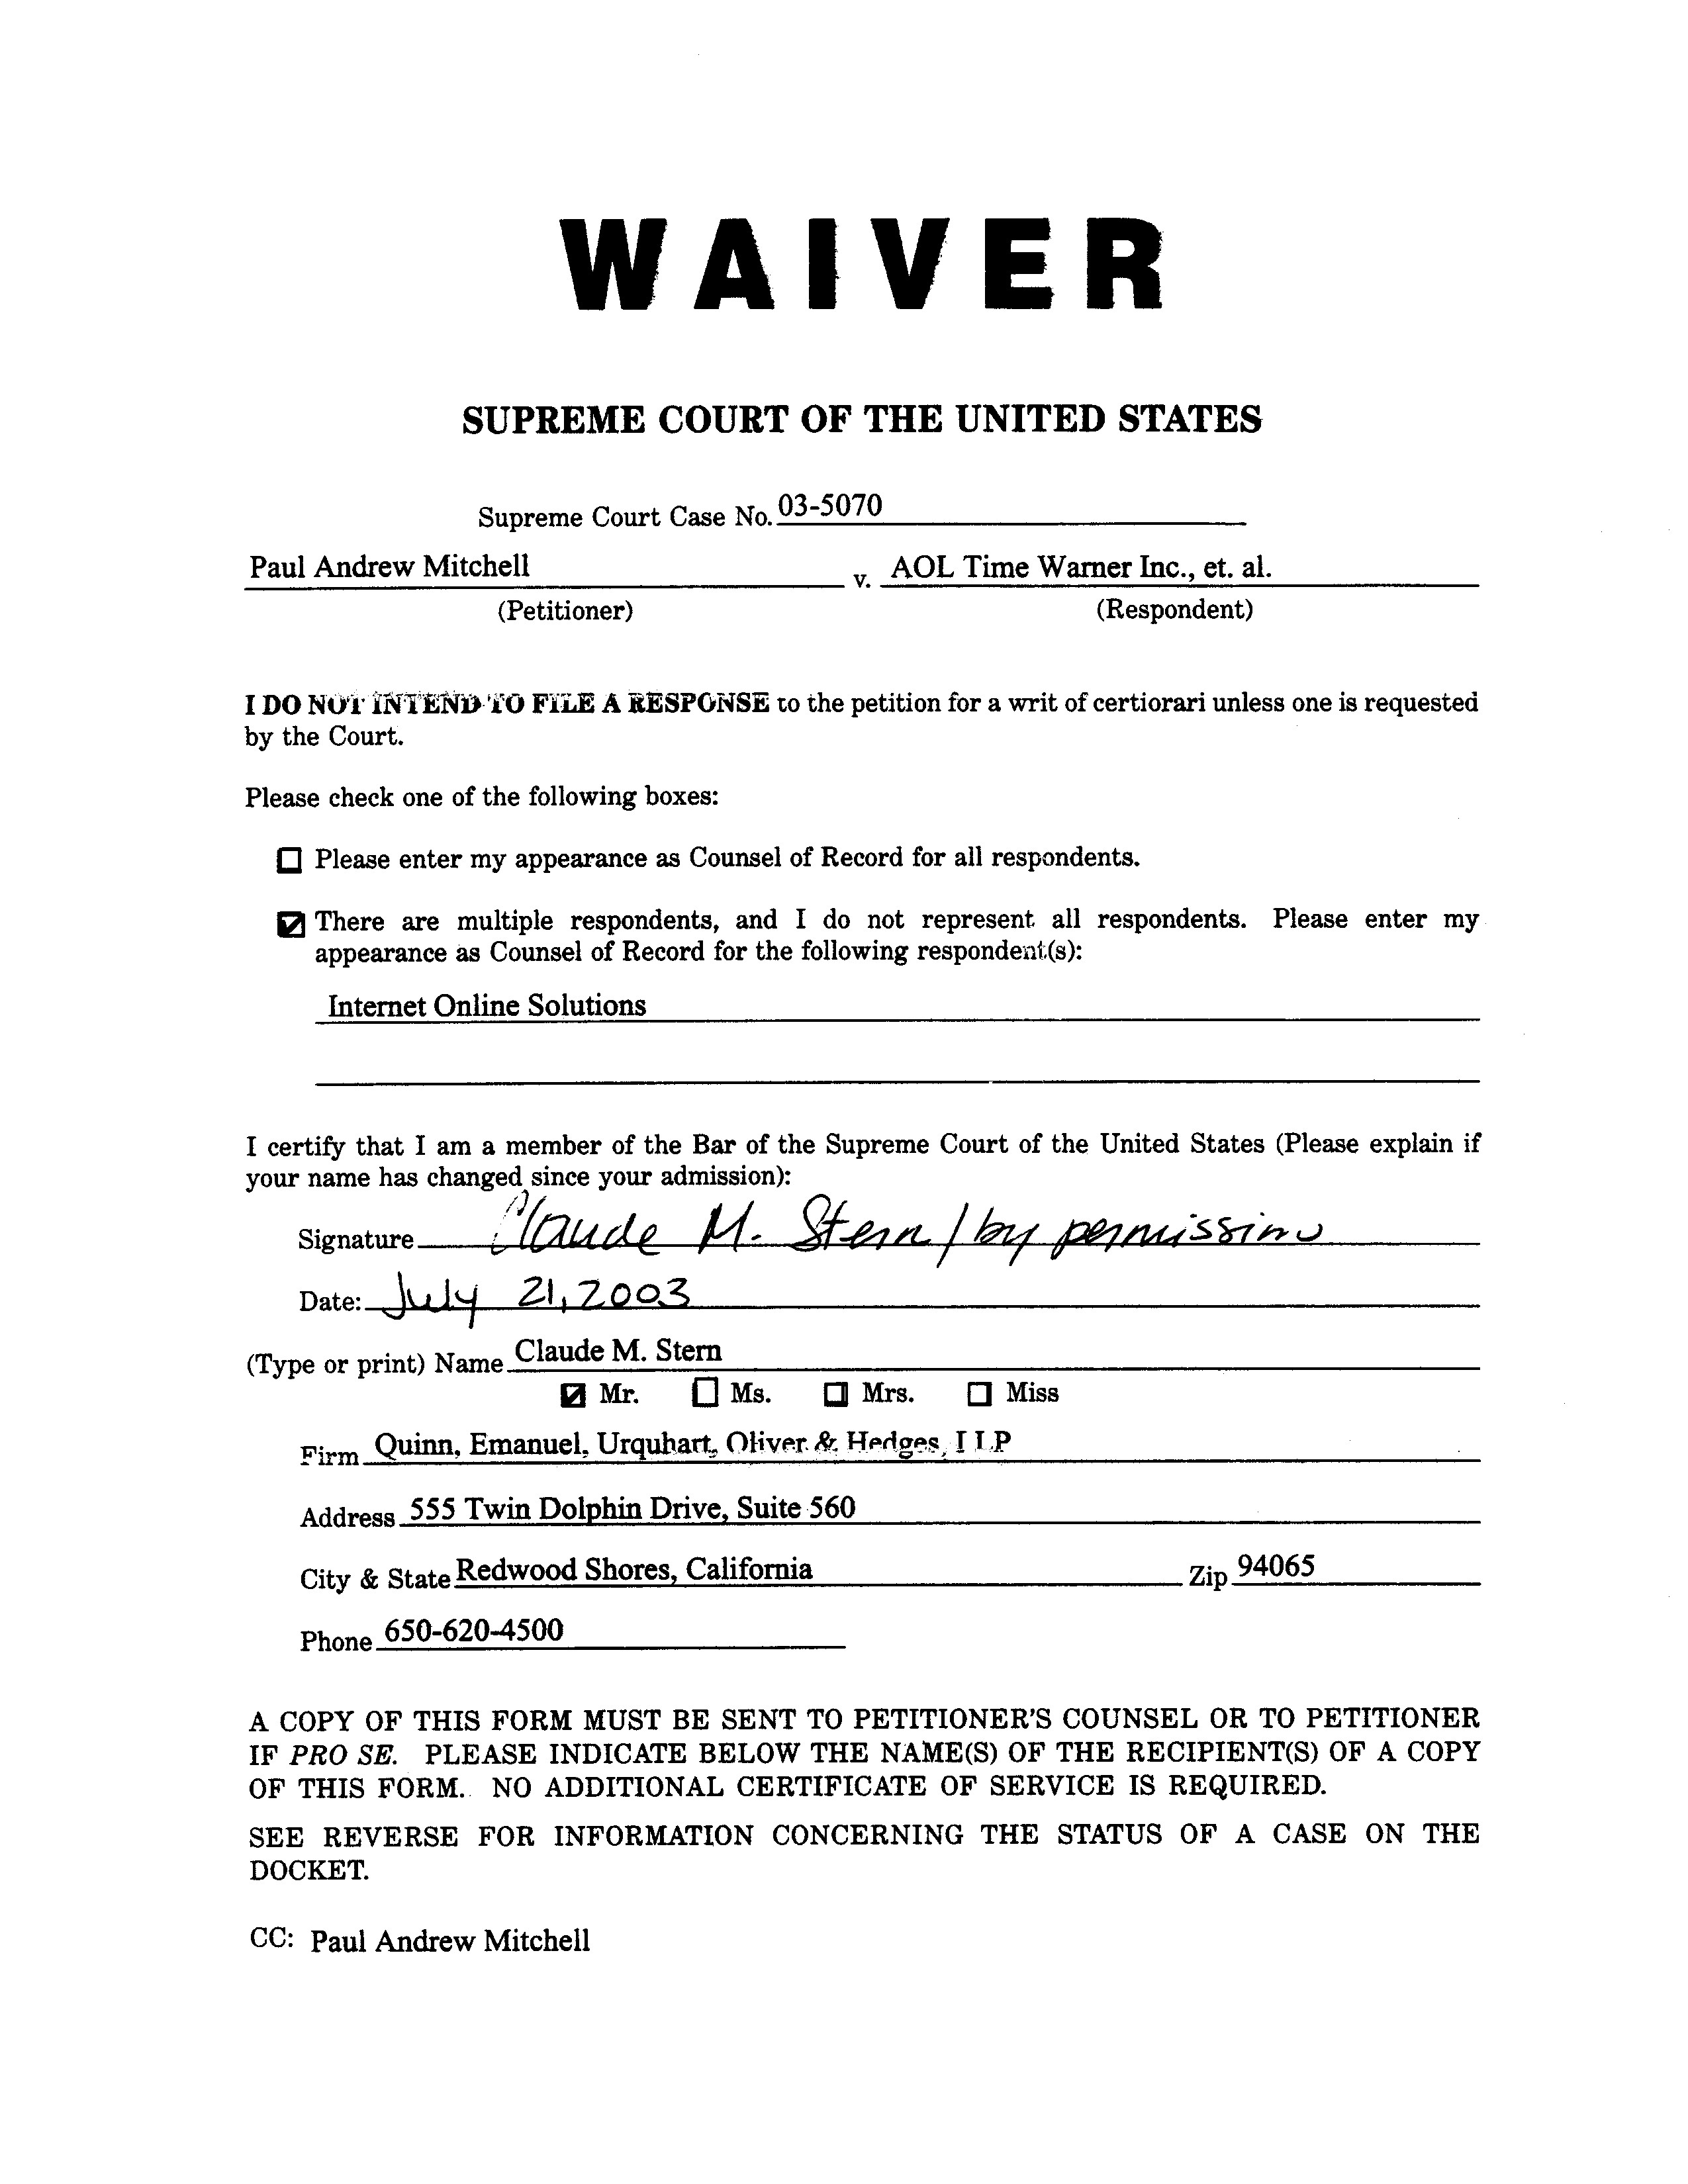 Waiver form Template for Sports Supreme Law Library Court Cases Mitchell V Aol Time